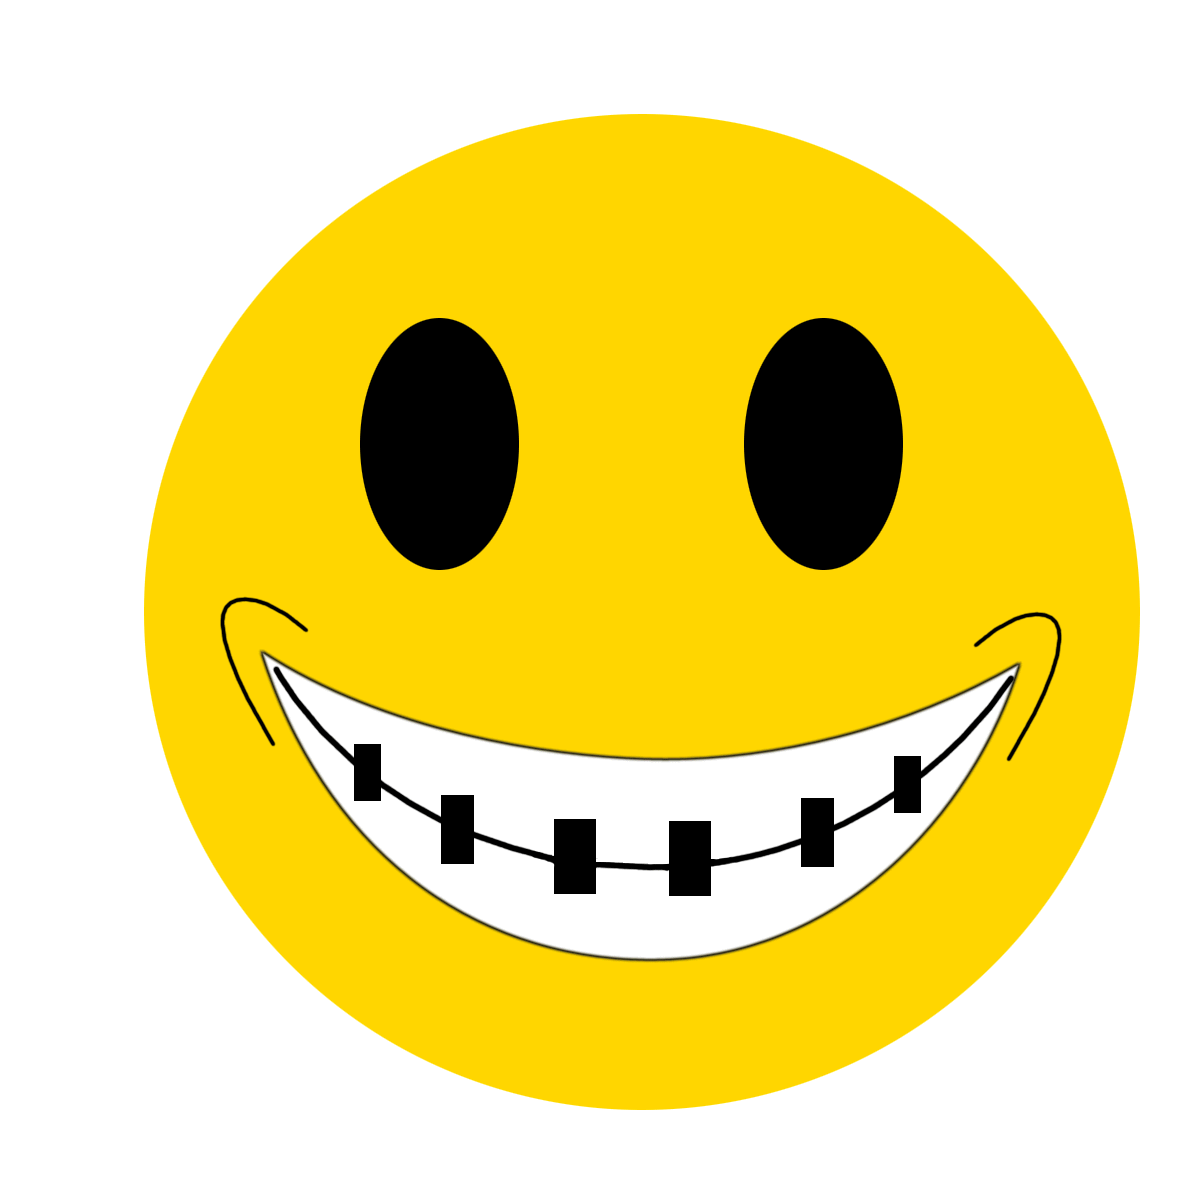 Lol Smiley Face Gif images